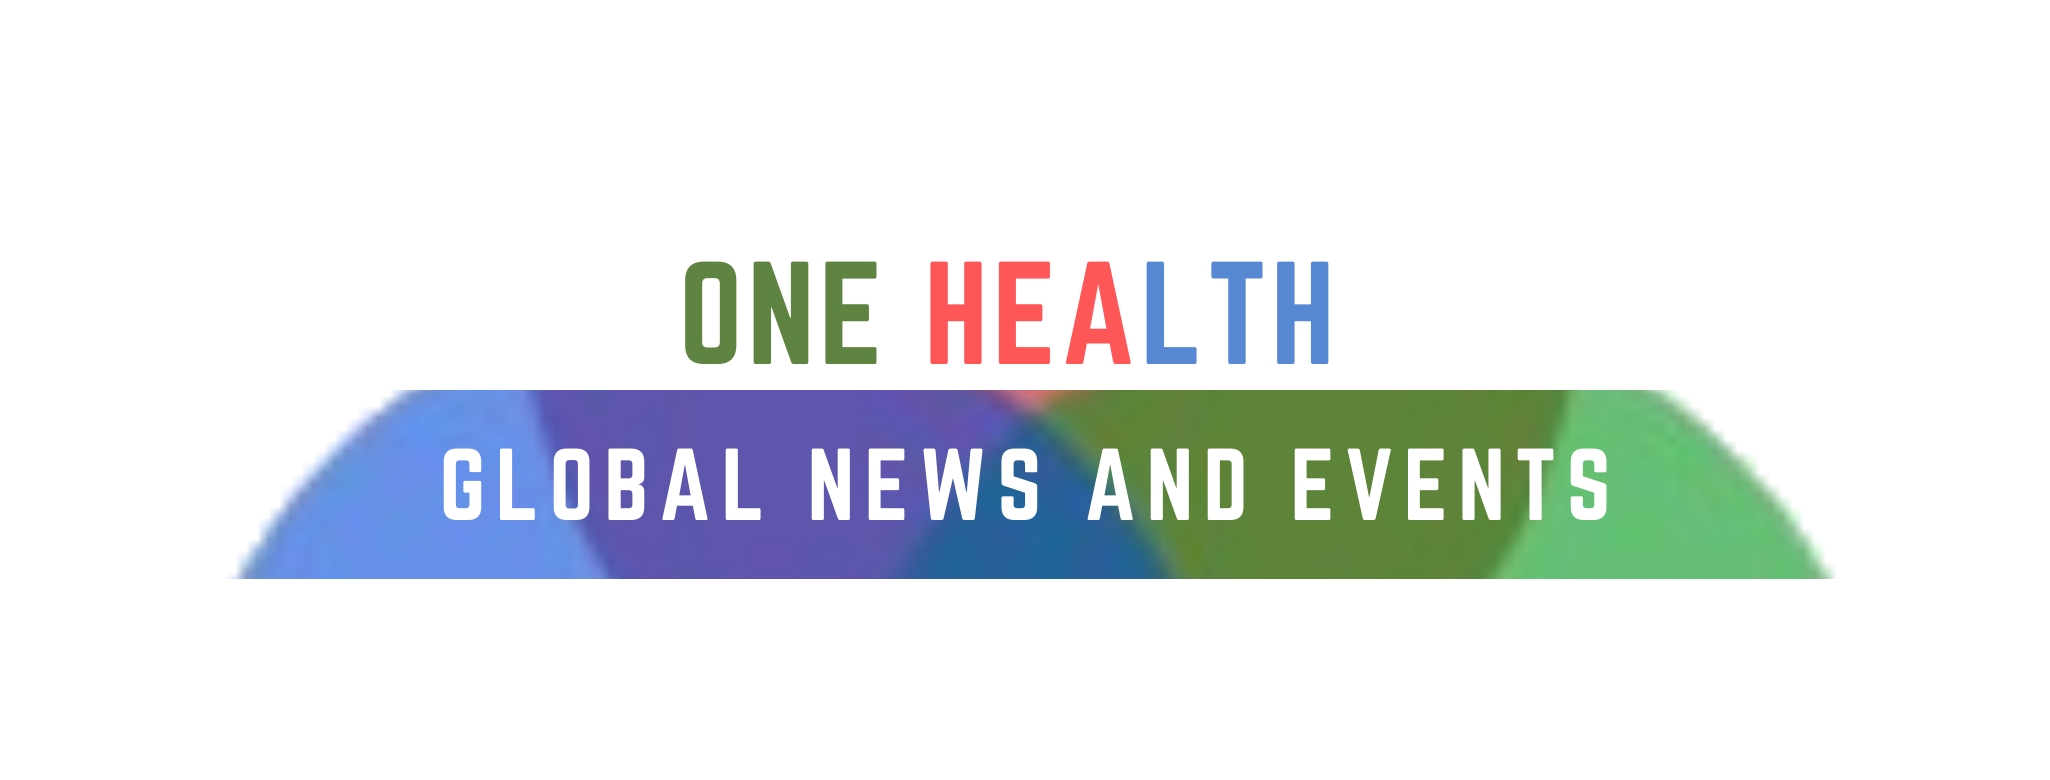 One Health Global News and Events